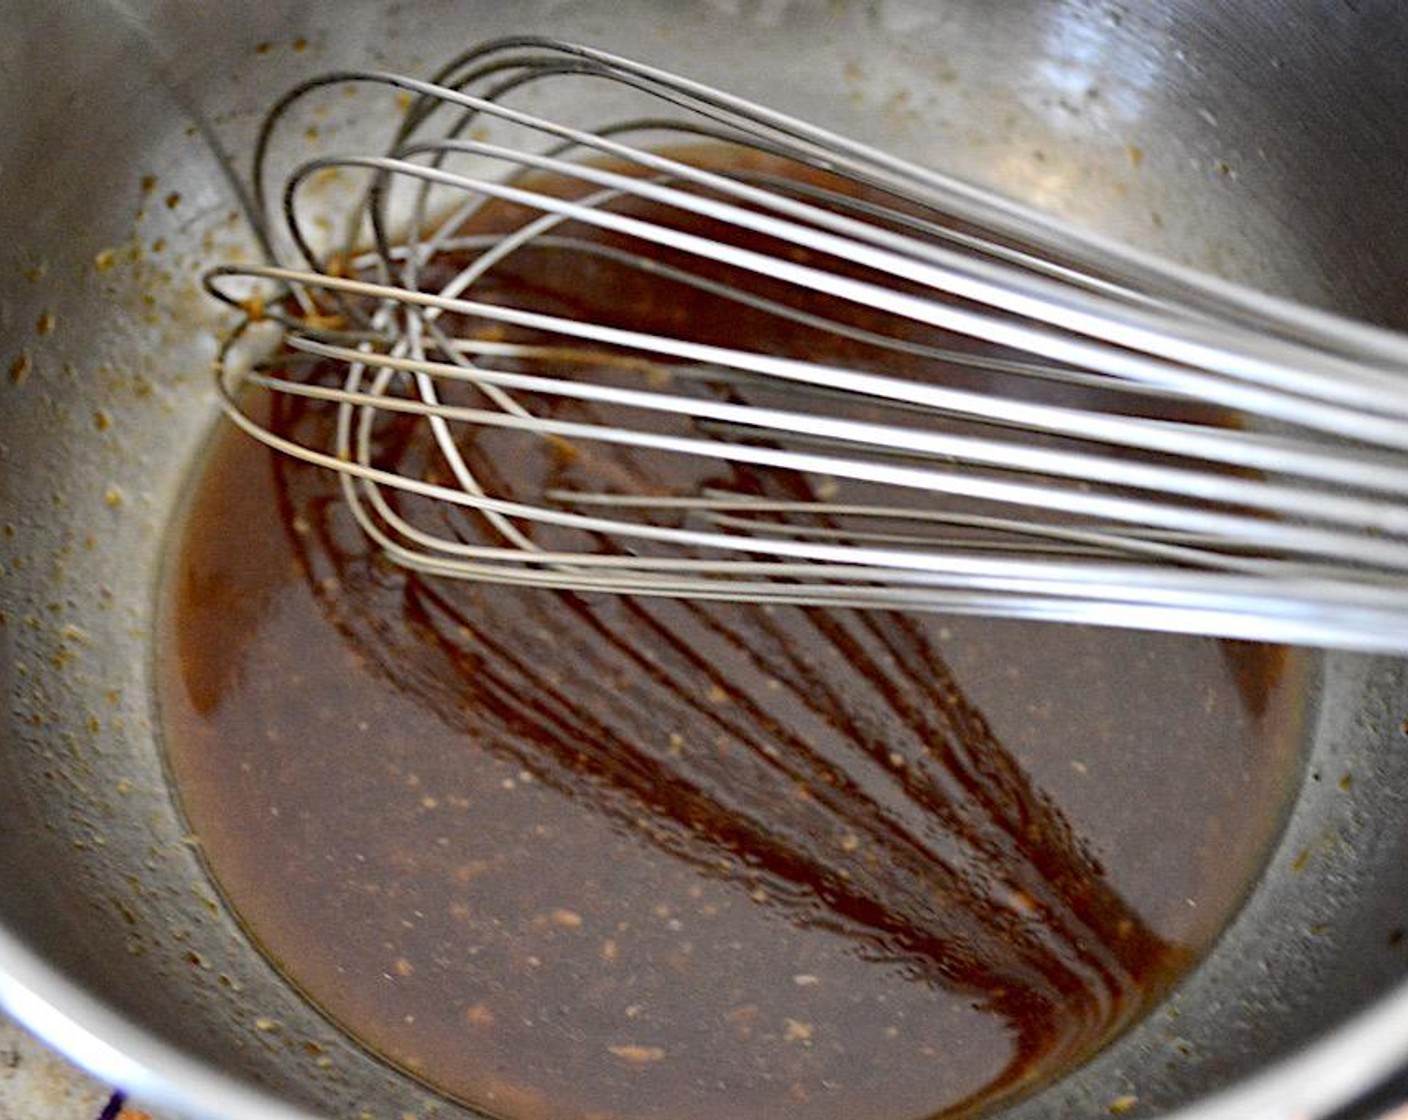 step 3 In another bowl whisk the Low-Sodium Soy Sauce (1/2 cup), Sesame Oil (1/4 cup), Olive Oil (1/4 cup), Worcestershire Sauce (1 dash), Fresh Ginger (1 Tbsp), Garlic (1 clove), Creamy Peanut Butter (1/2 tsp) and Chinese Five Spice Powder (1/4 tsp) together thoroughly.